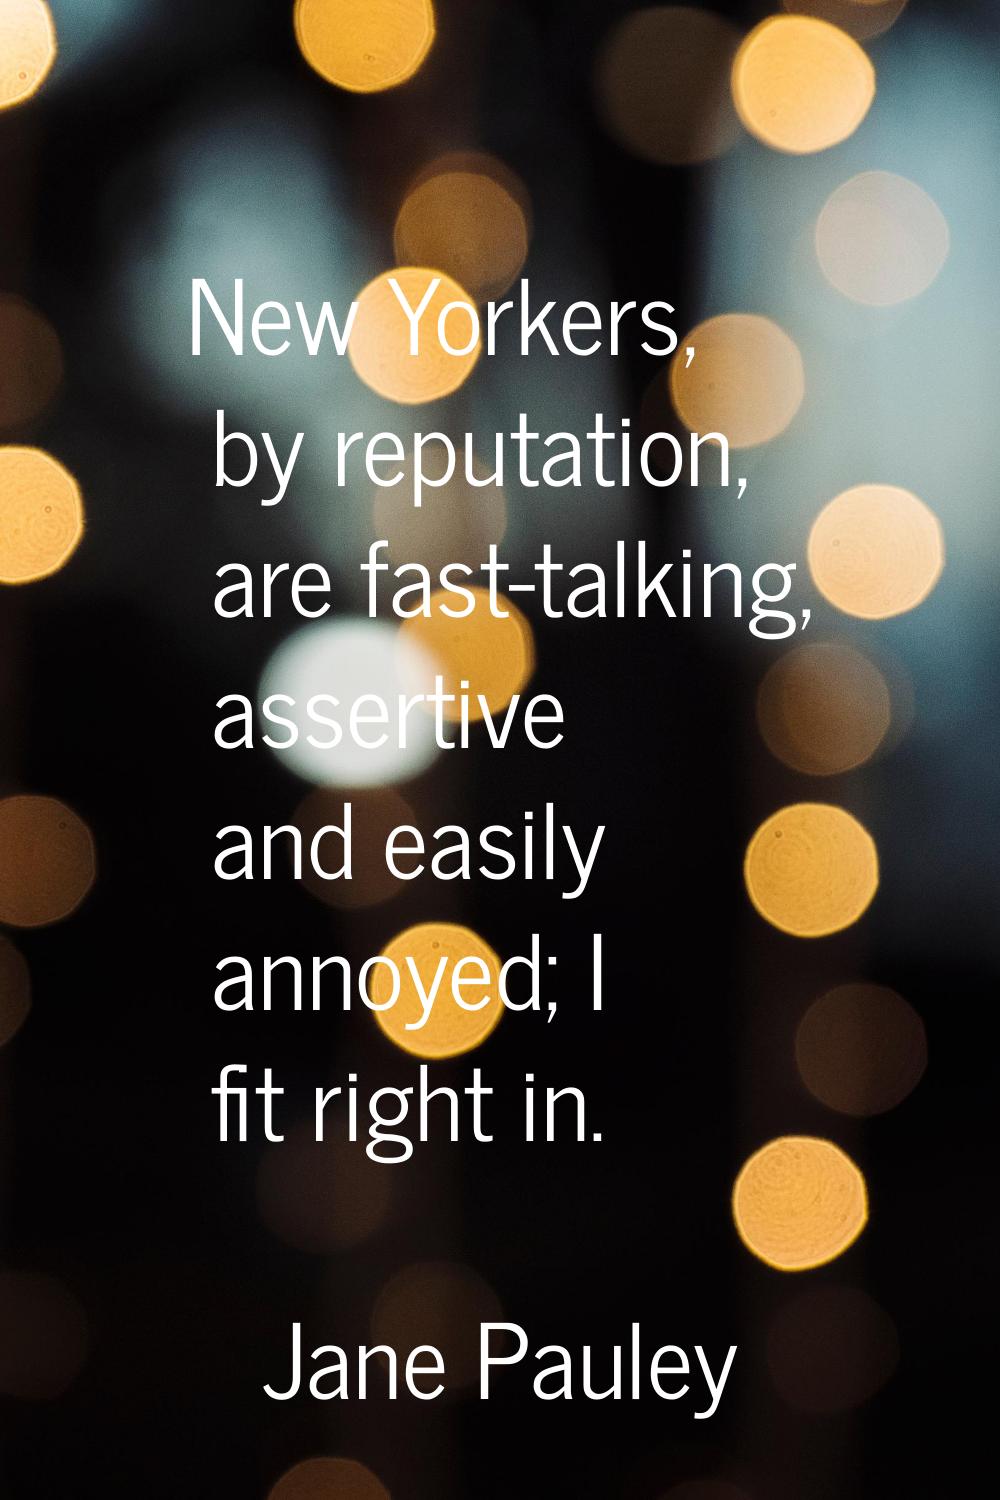 New Yorkers, by reputation, are fast-talking, assertive and easily annoyed; I fit right in.